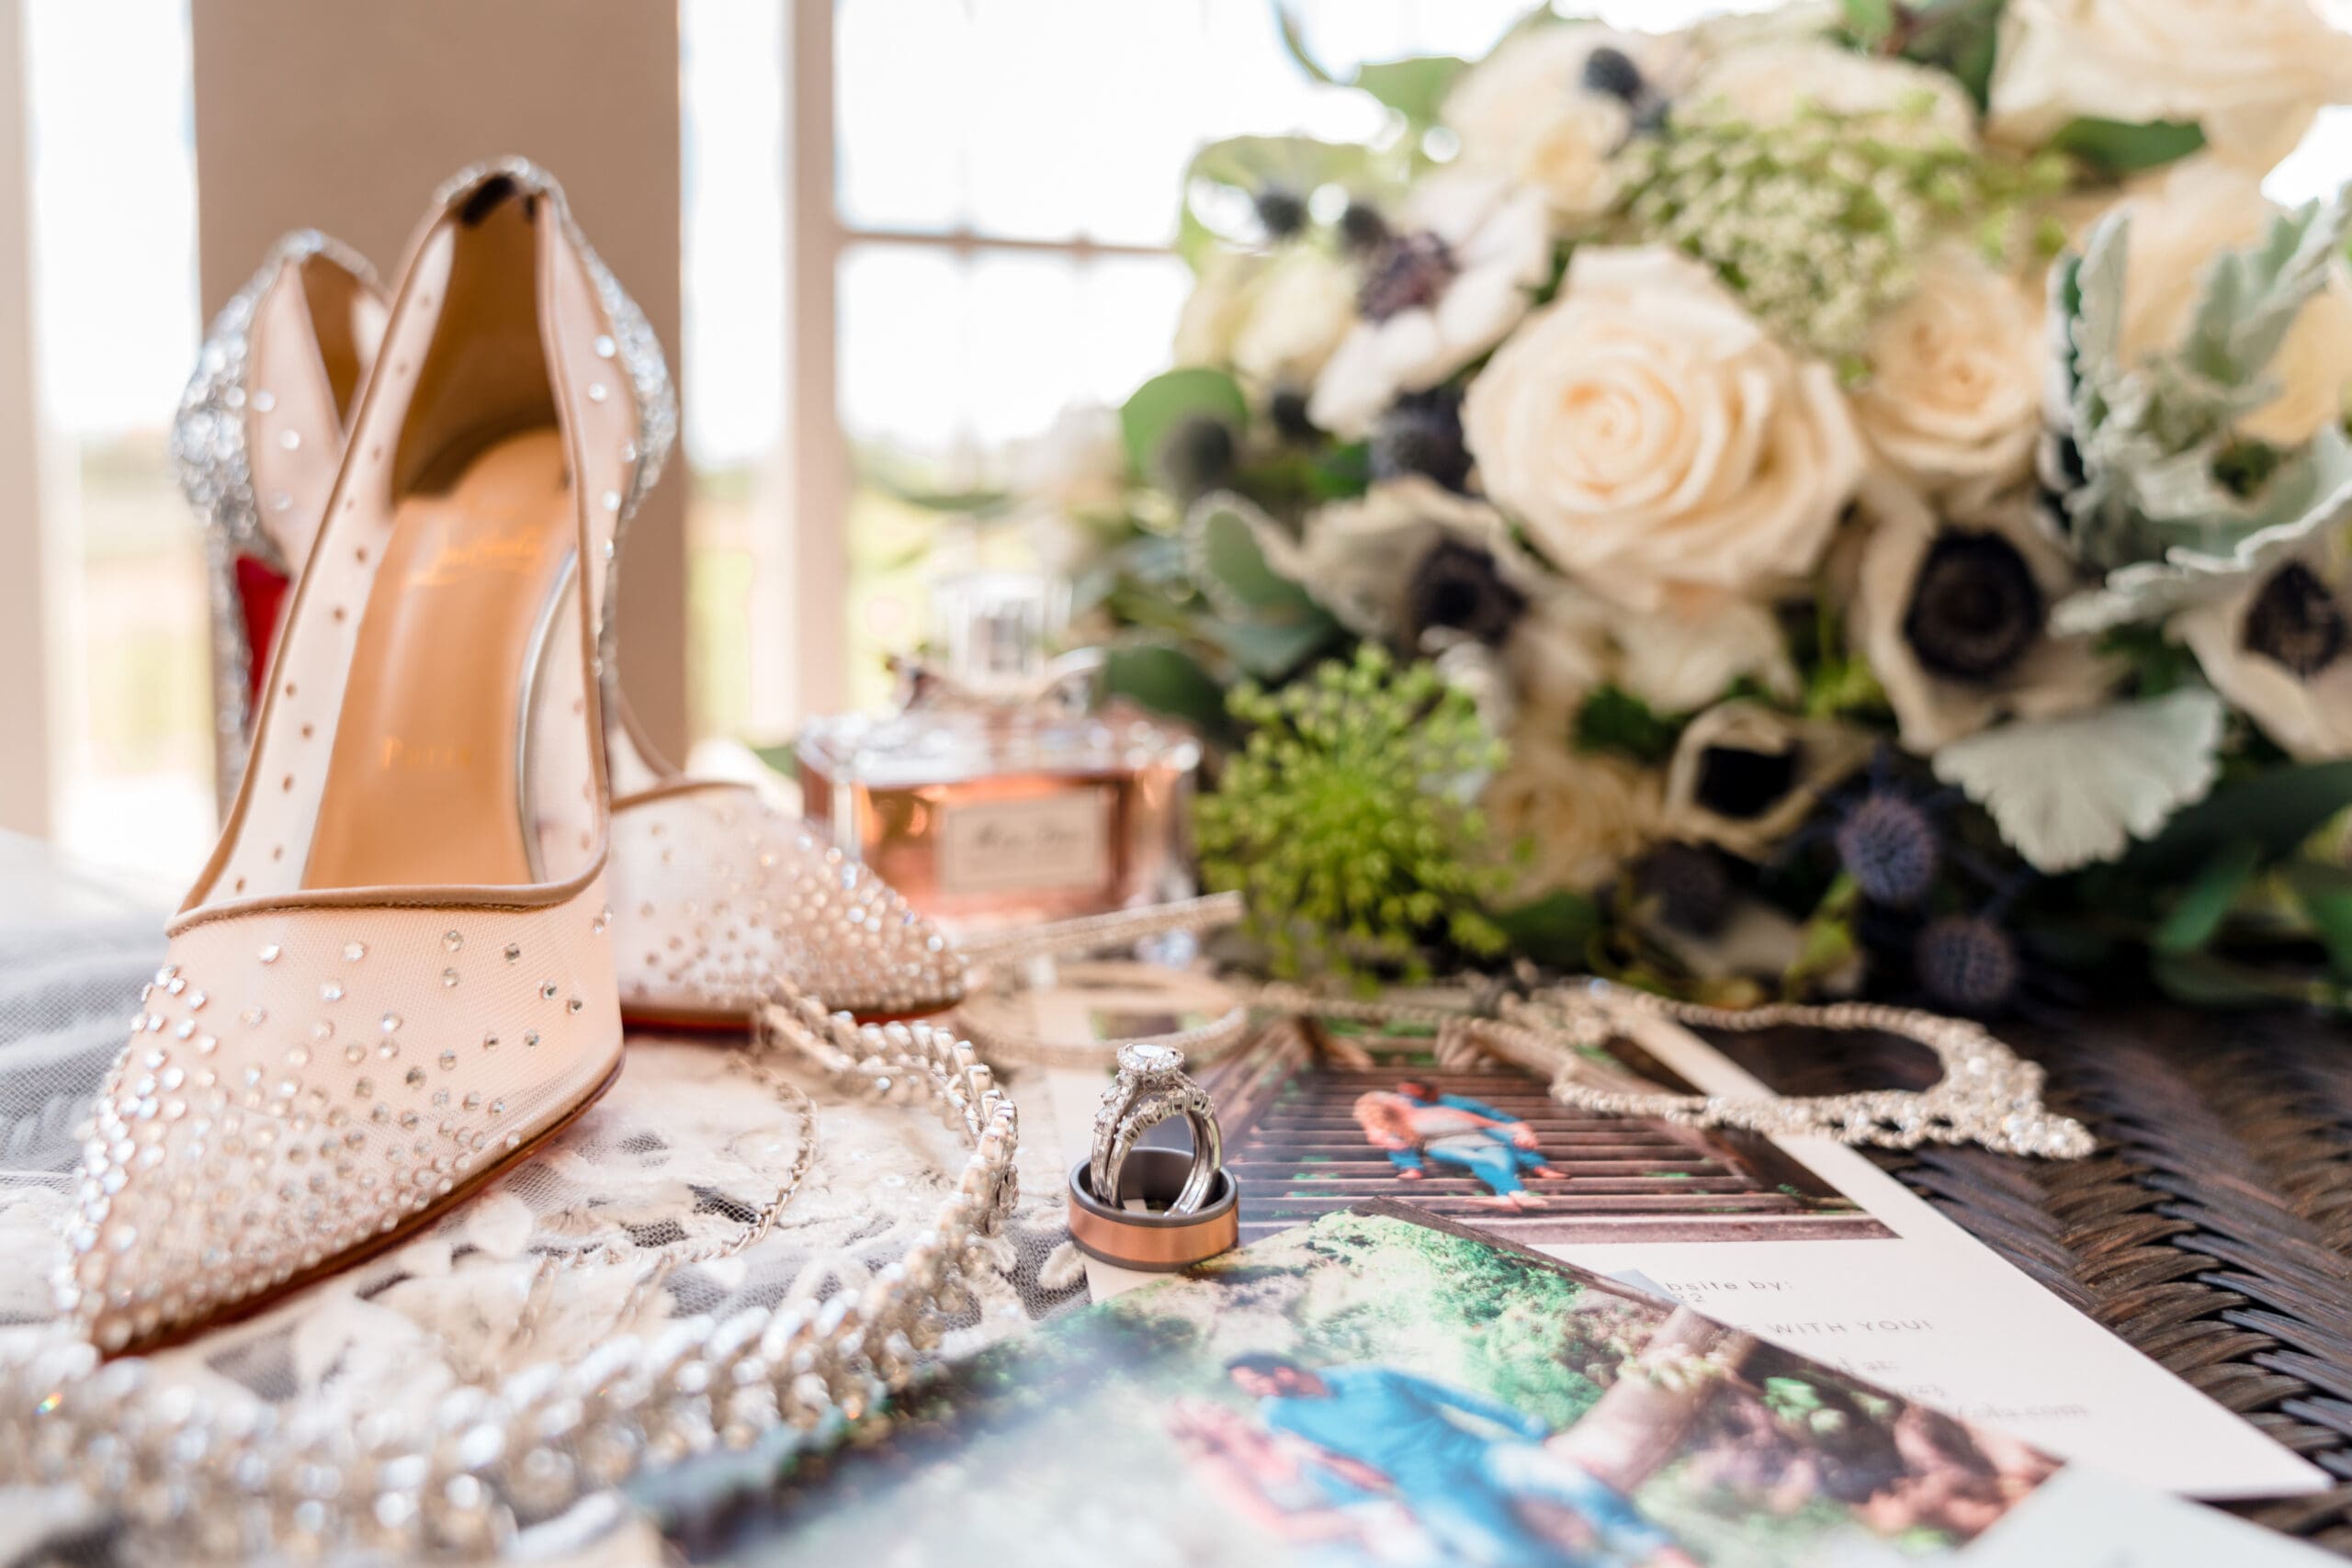 Close-up of wedding rings and bridal shoes